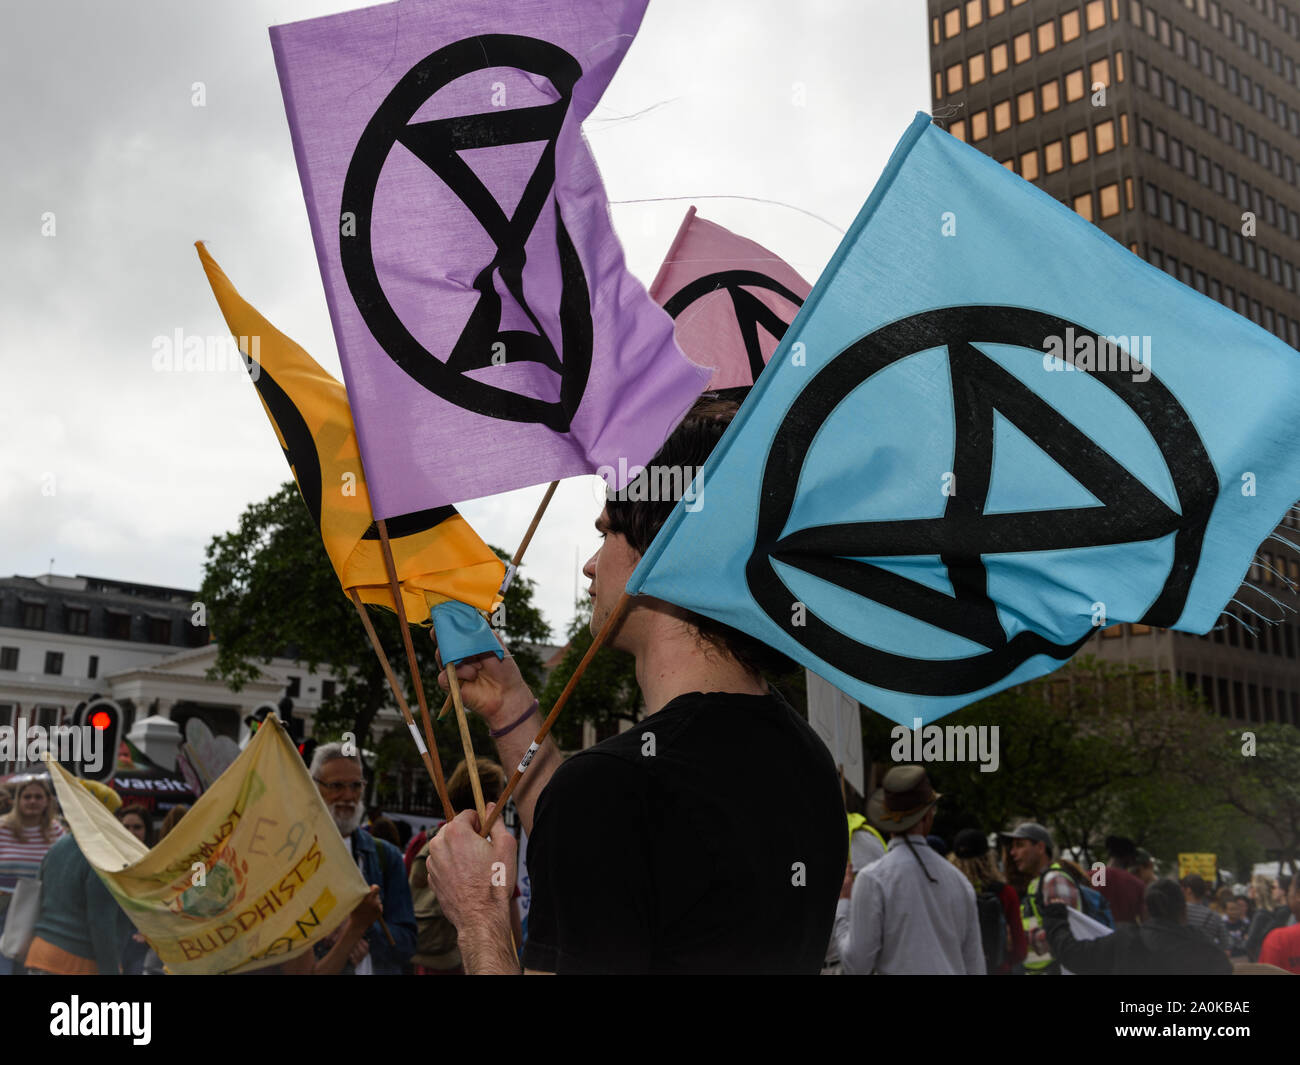 Extinction Rebellion at the global climate strike inspired by climate activist Greta Thunberg in Cape Town, South Africa - 20 March 2019 Stock Photo